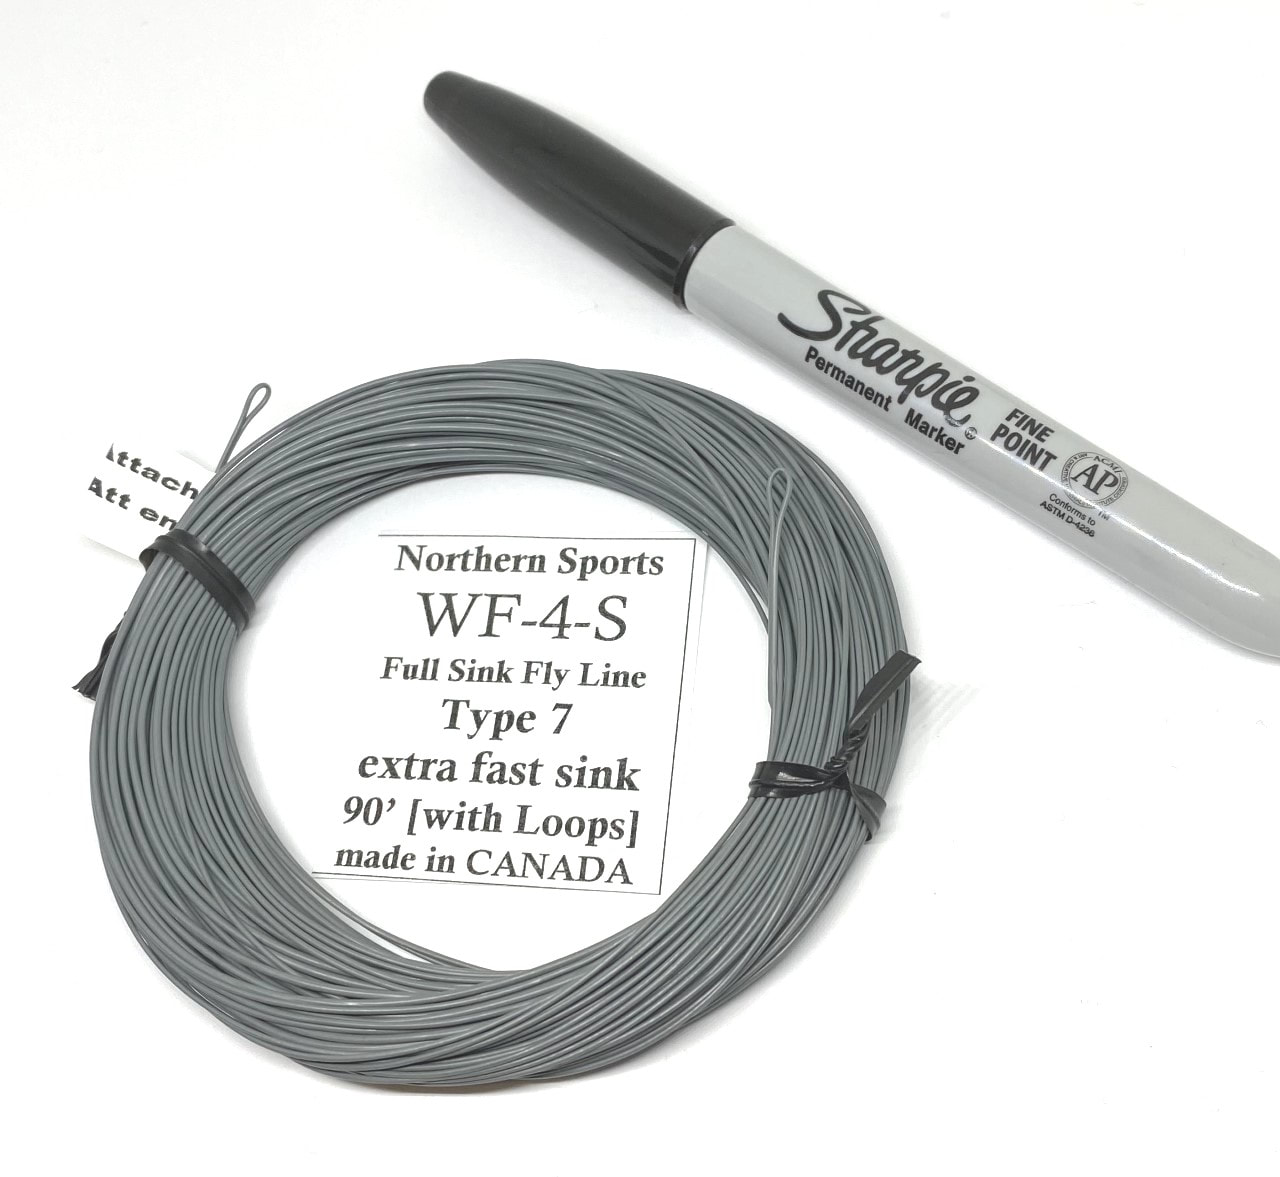 made in Canada Fast Sink Lake fly line w/ Loops WF-5-S Full Sink type 5 